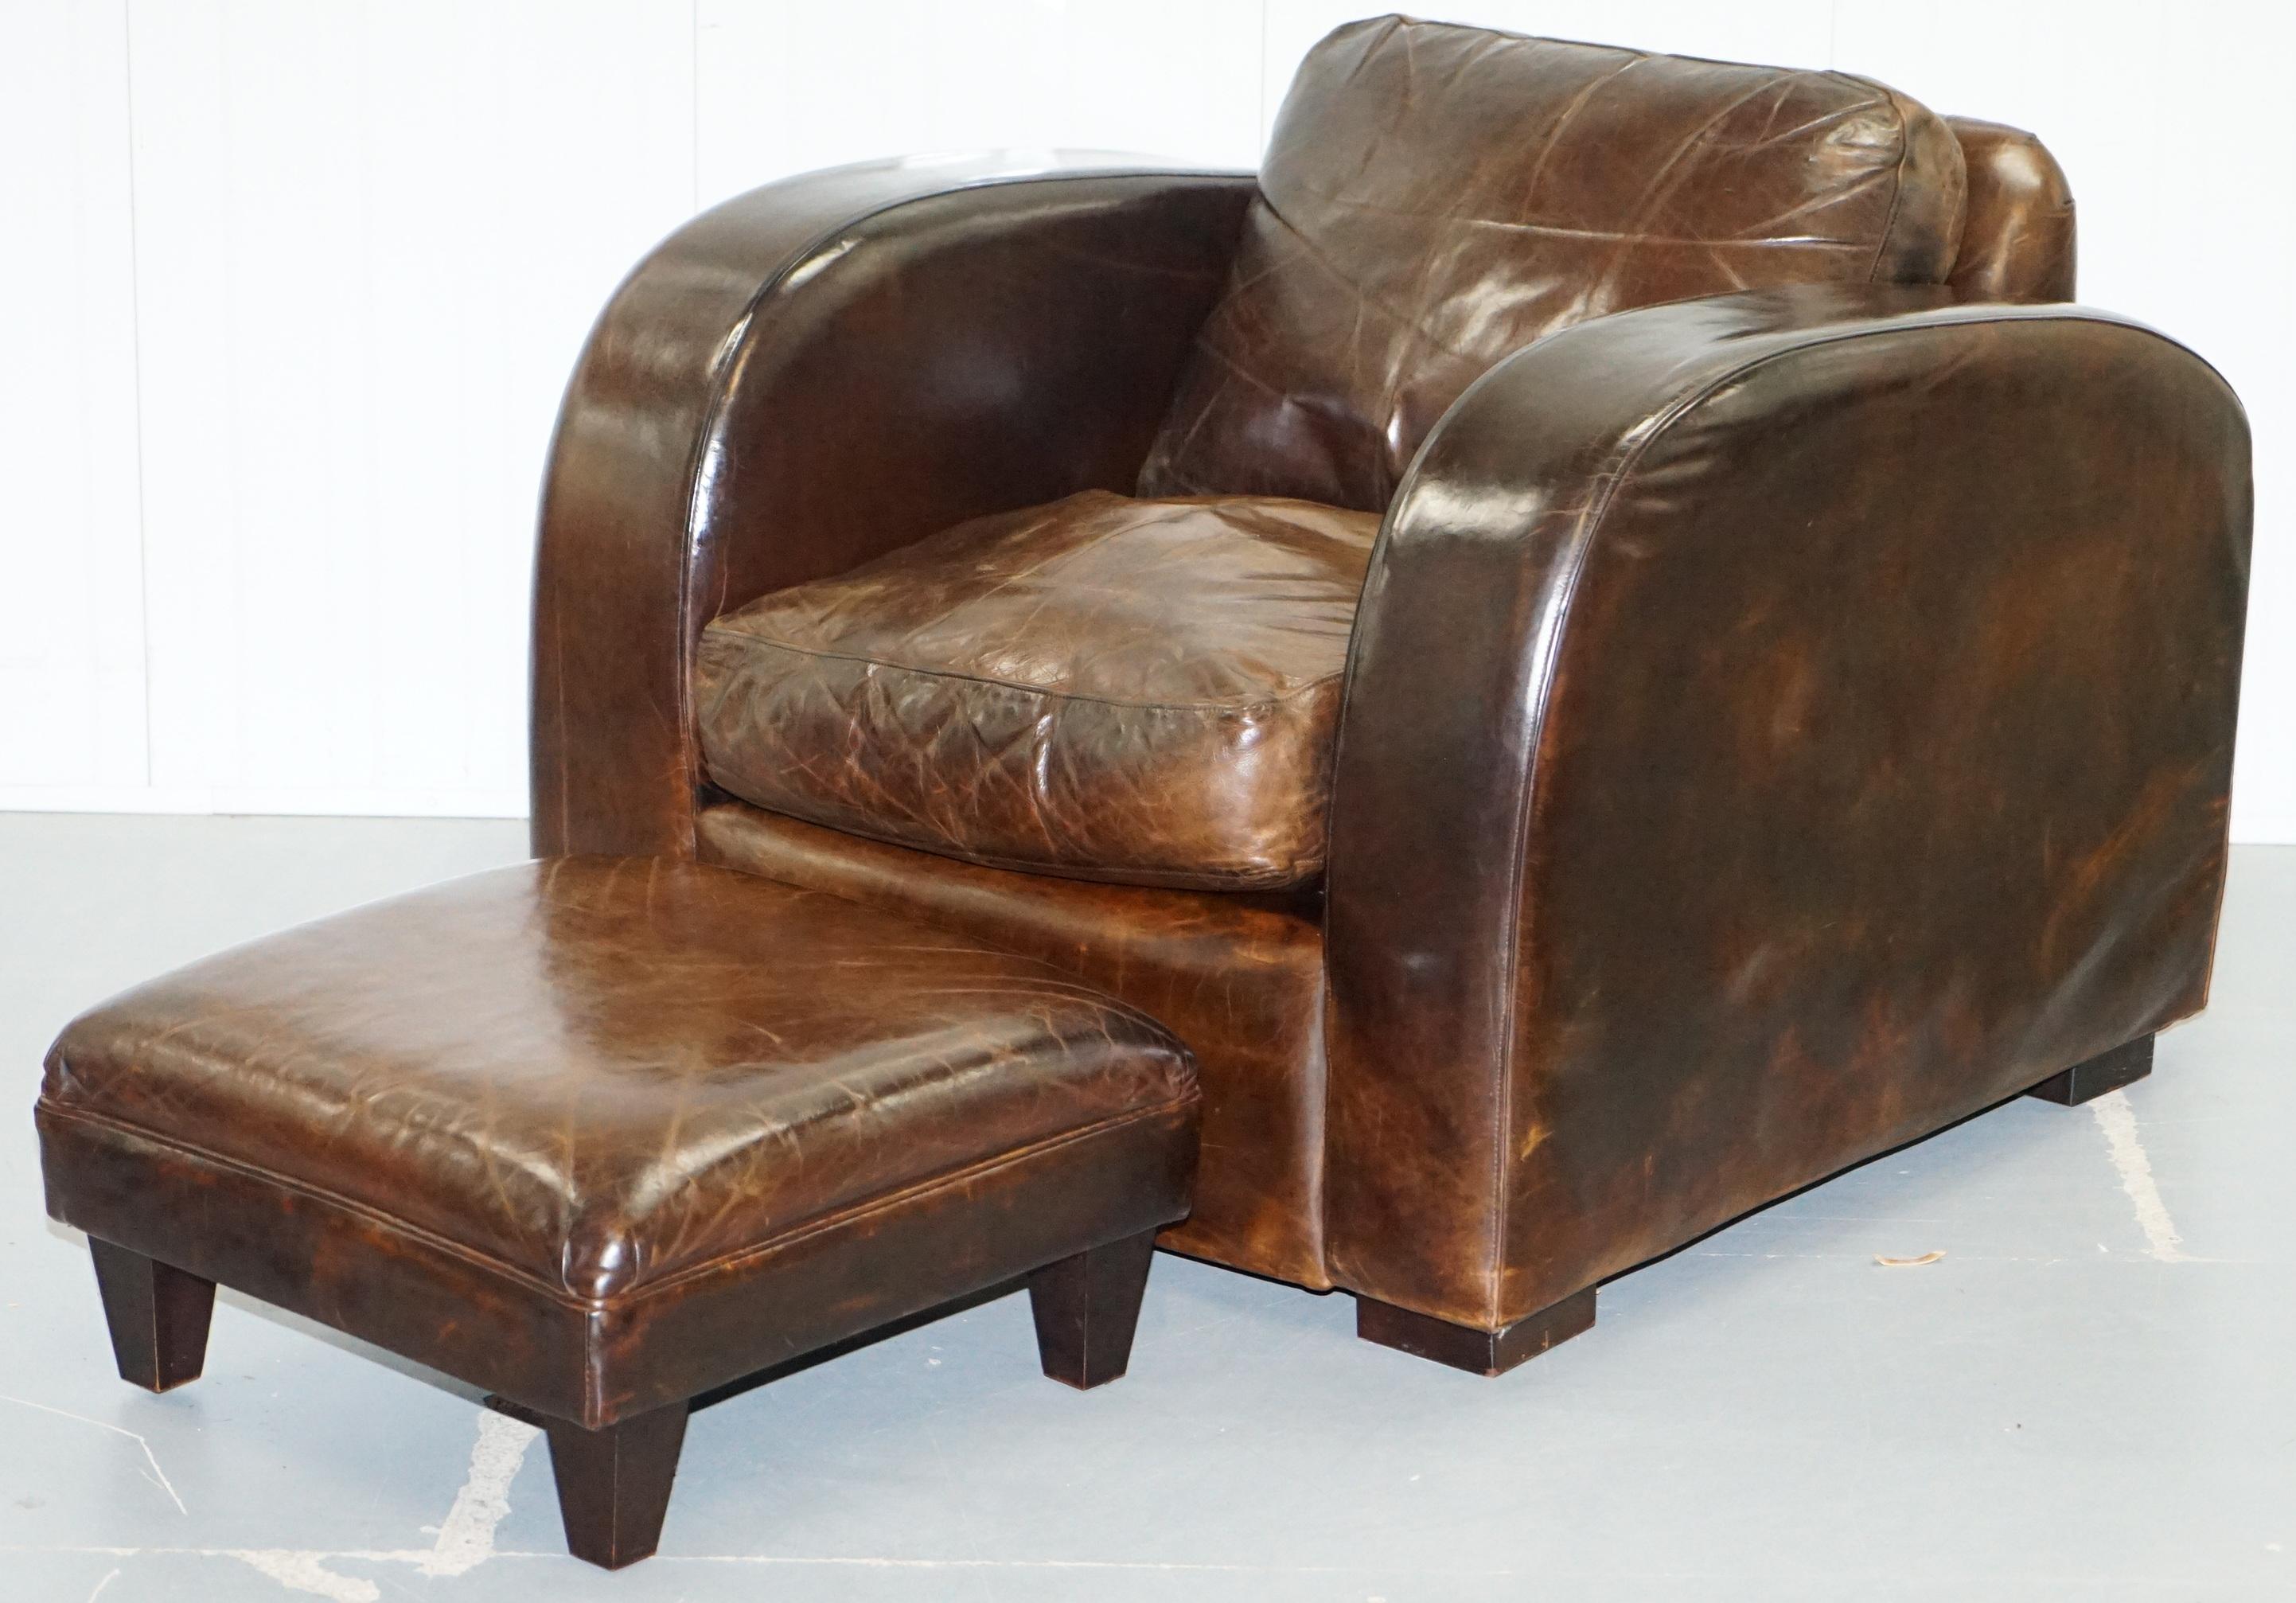 We are delighted to offer for sale this lovely set of original handmade in London pair of hand dyed brown leather club armchairs and footstools by Freestyle London LTD.

An extremely stylish and comfortable pair, the lines look very Art Deco with